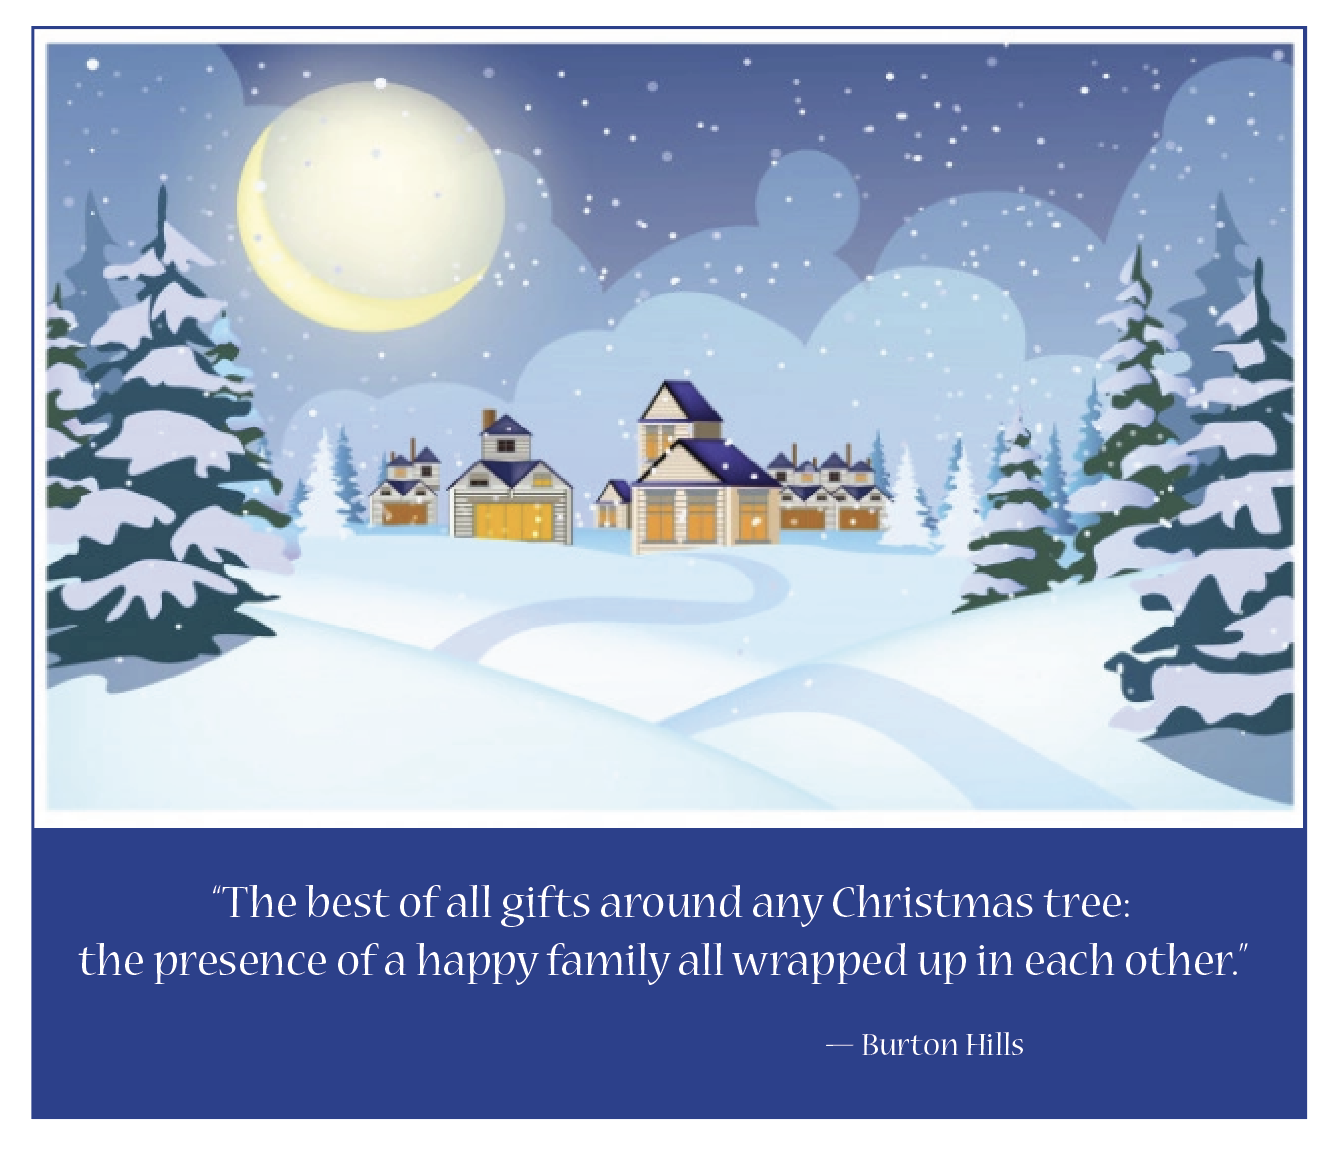 “The best of all gifts around any Christmas tree:
the presence of a happy family all wrapped up in each other.’

Burton Hills